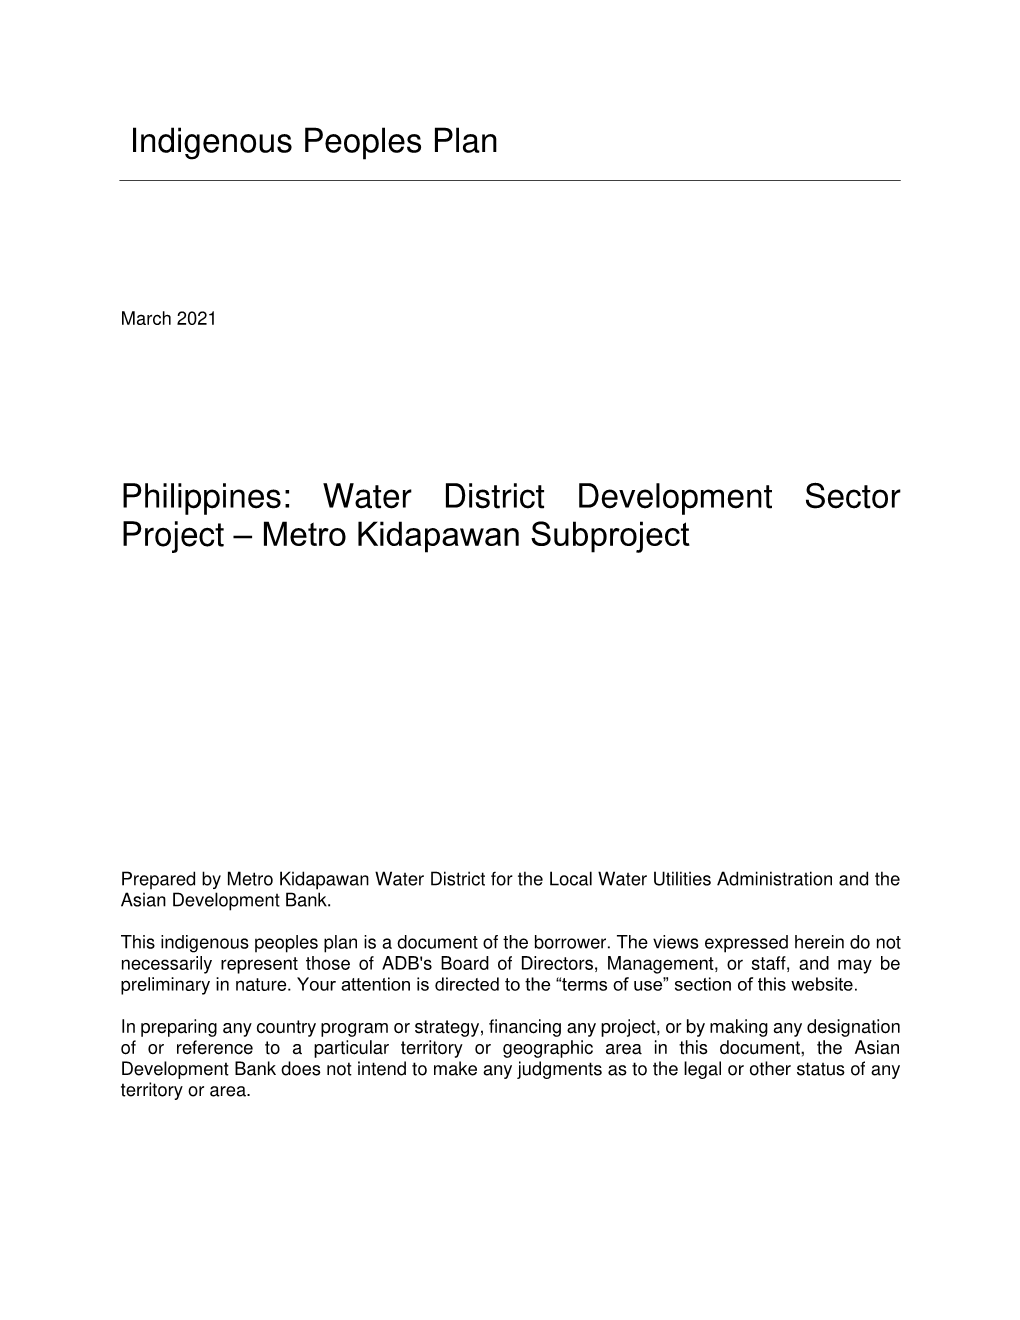 Indigenous Peoples Plan Philippines: Water District Development Sector